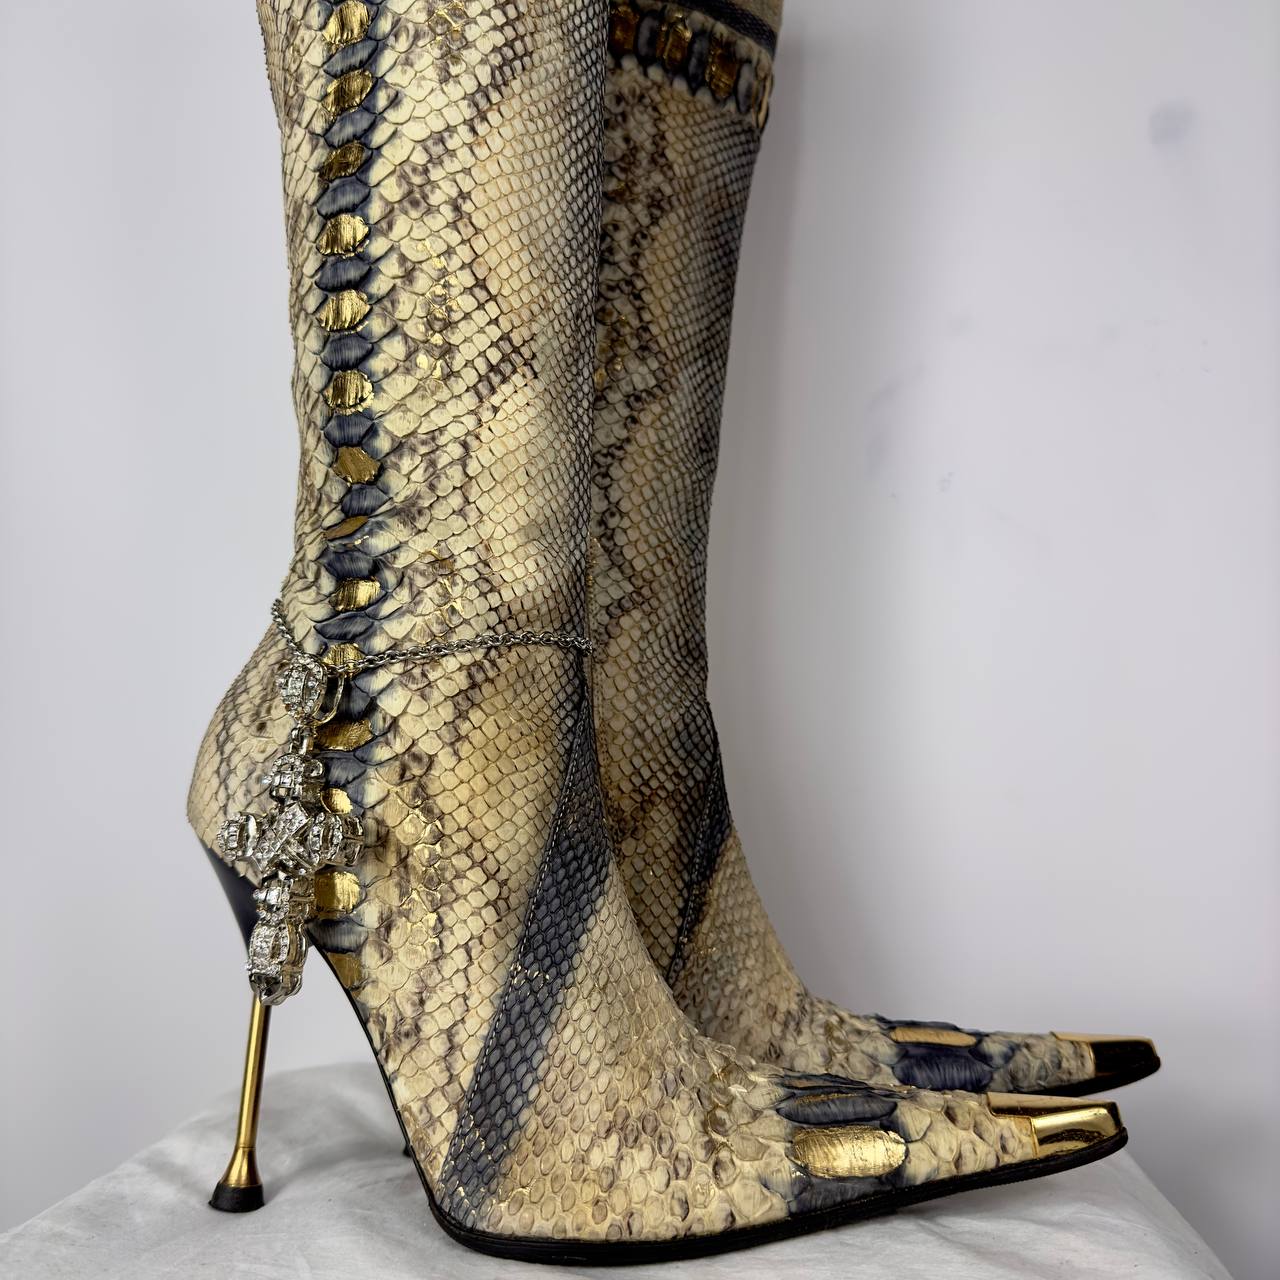 Hamlet Couture Python Leather Italian Boots 37/38 & 39/40